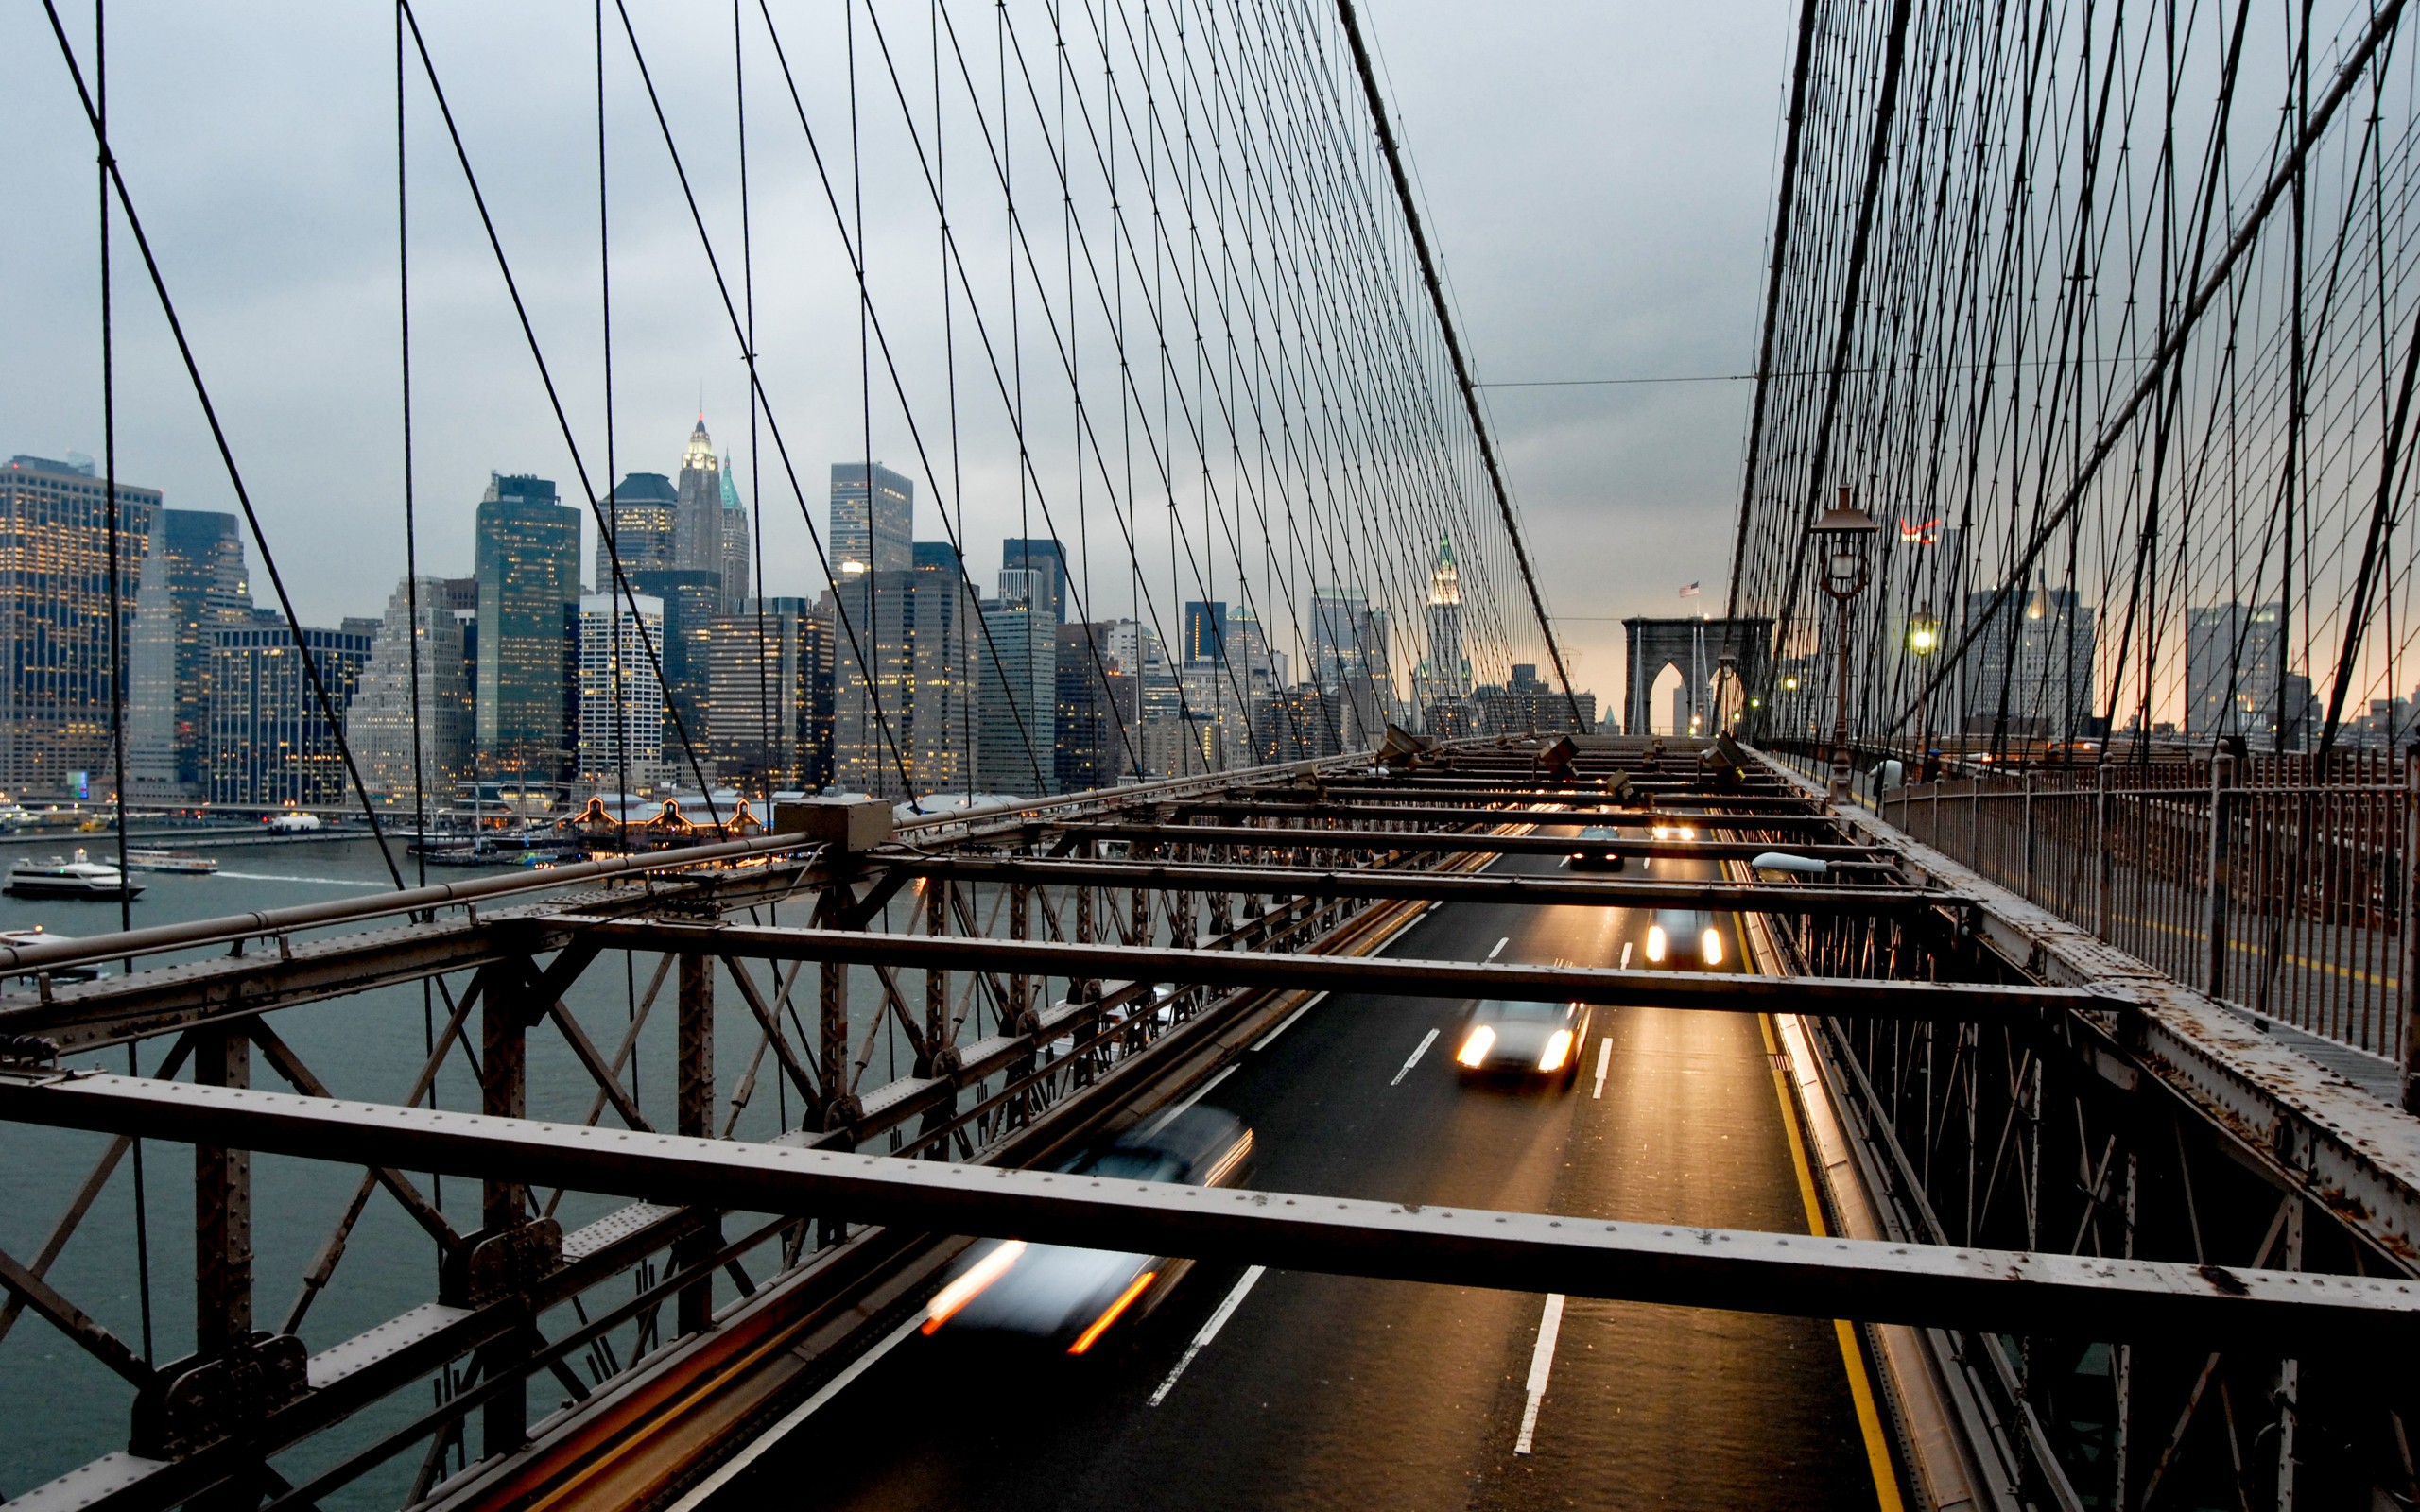 On the bridge in New York wallpapers and images - wallpapers ...